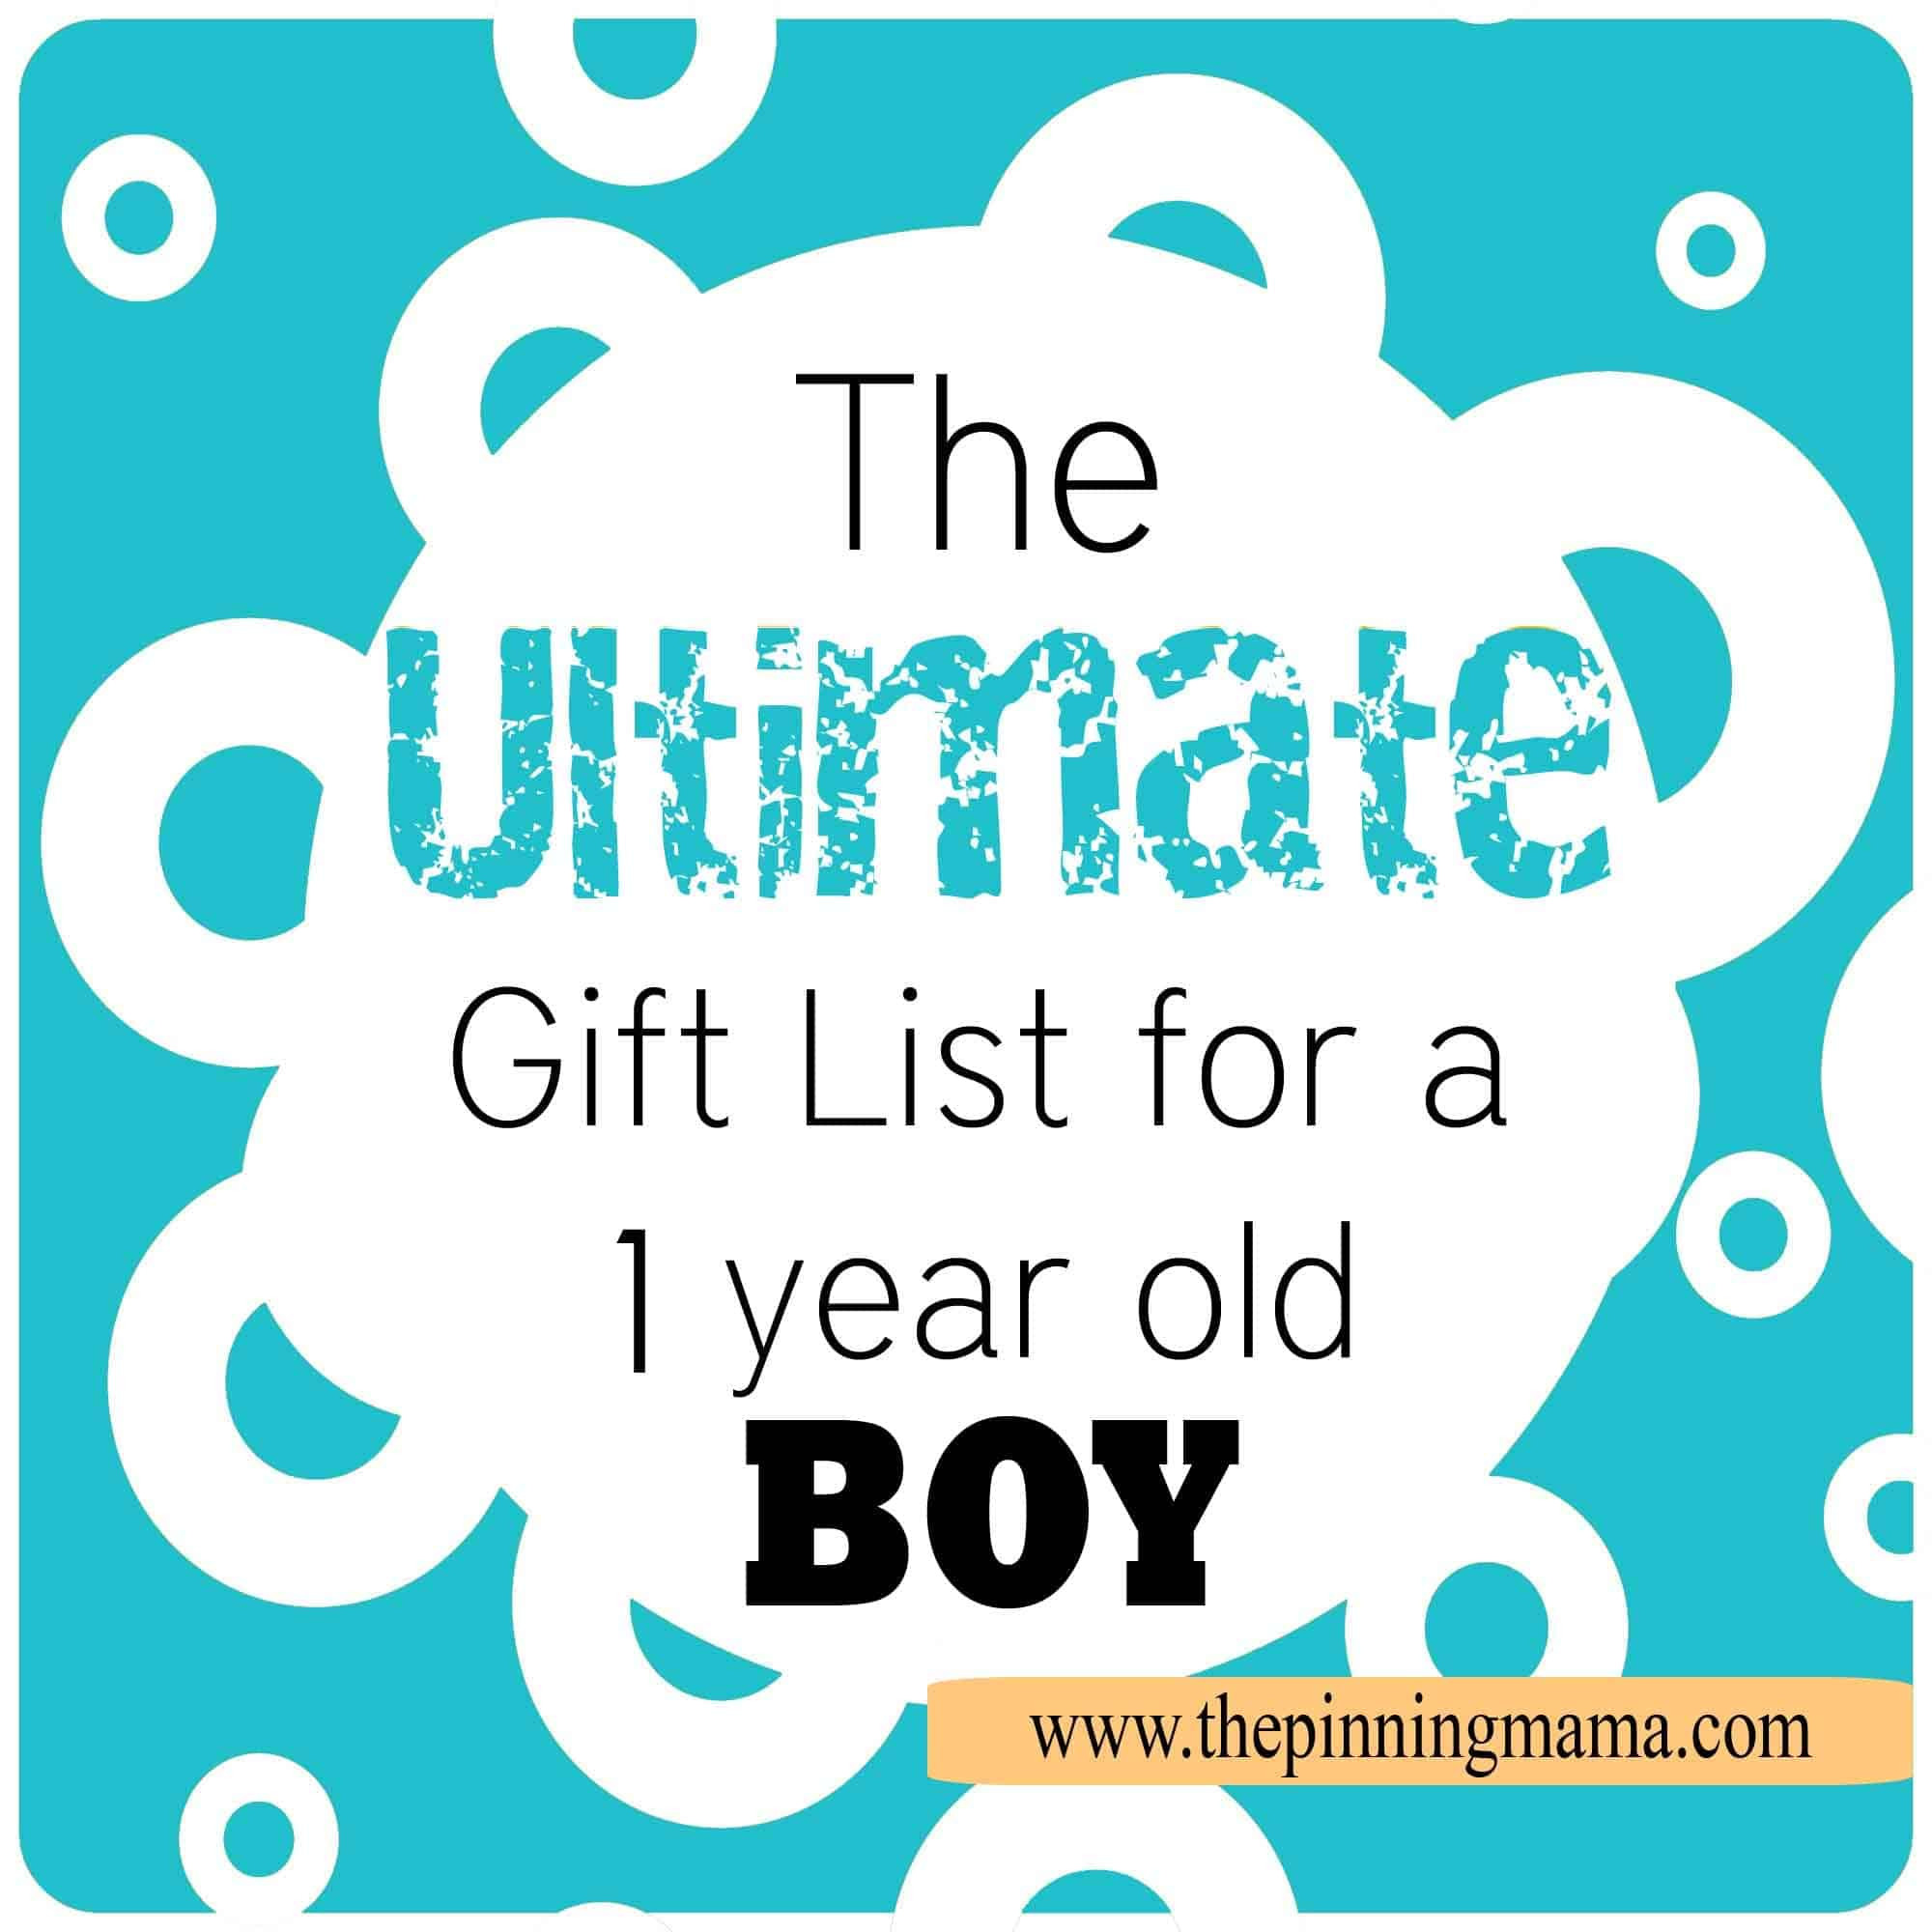 1 Year Baby Boy Gift Ideas
 The Ultimate Gift List for a 1 Year Old Boy by